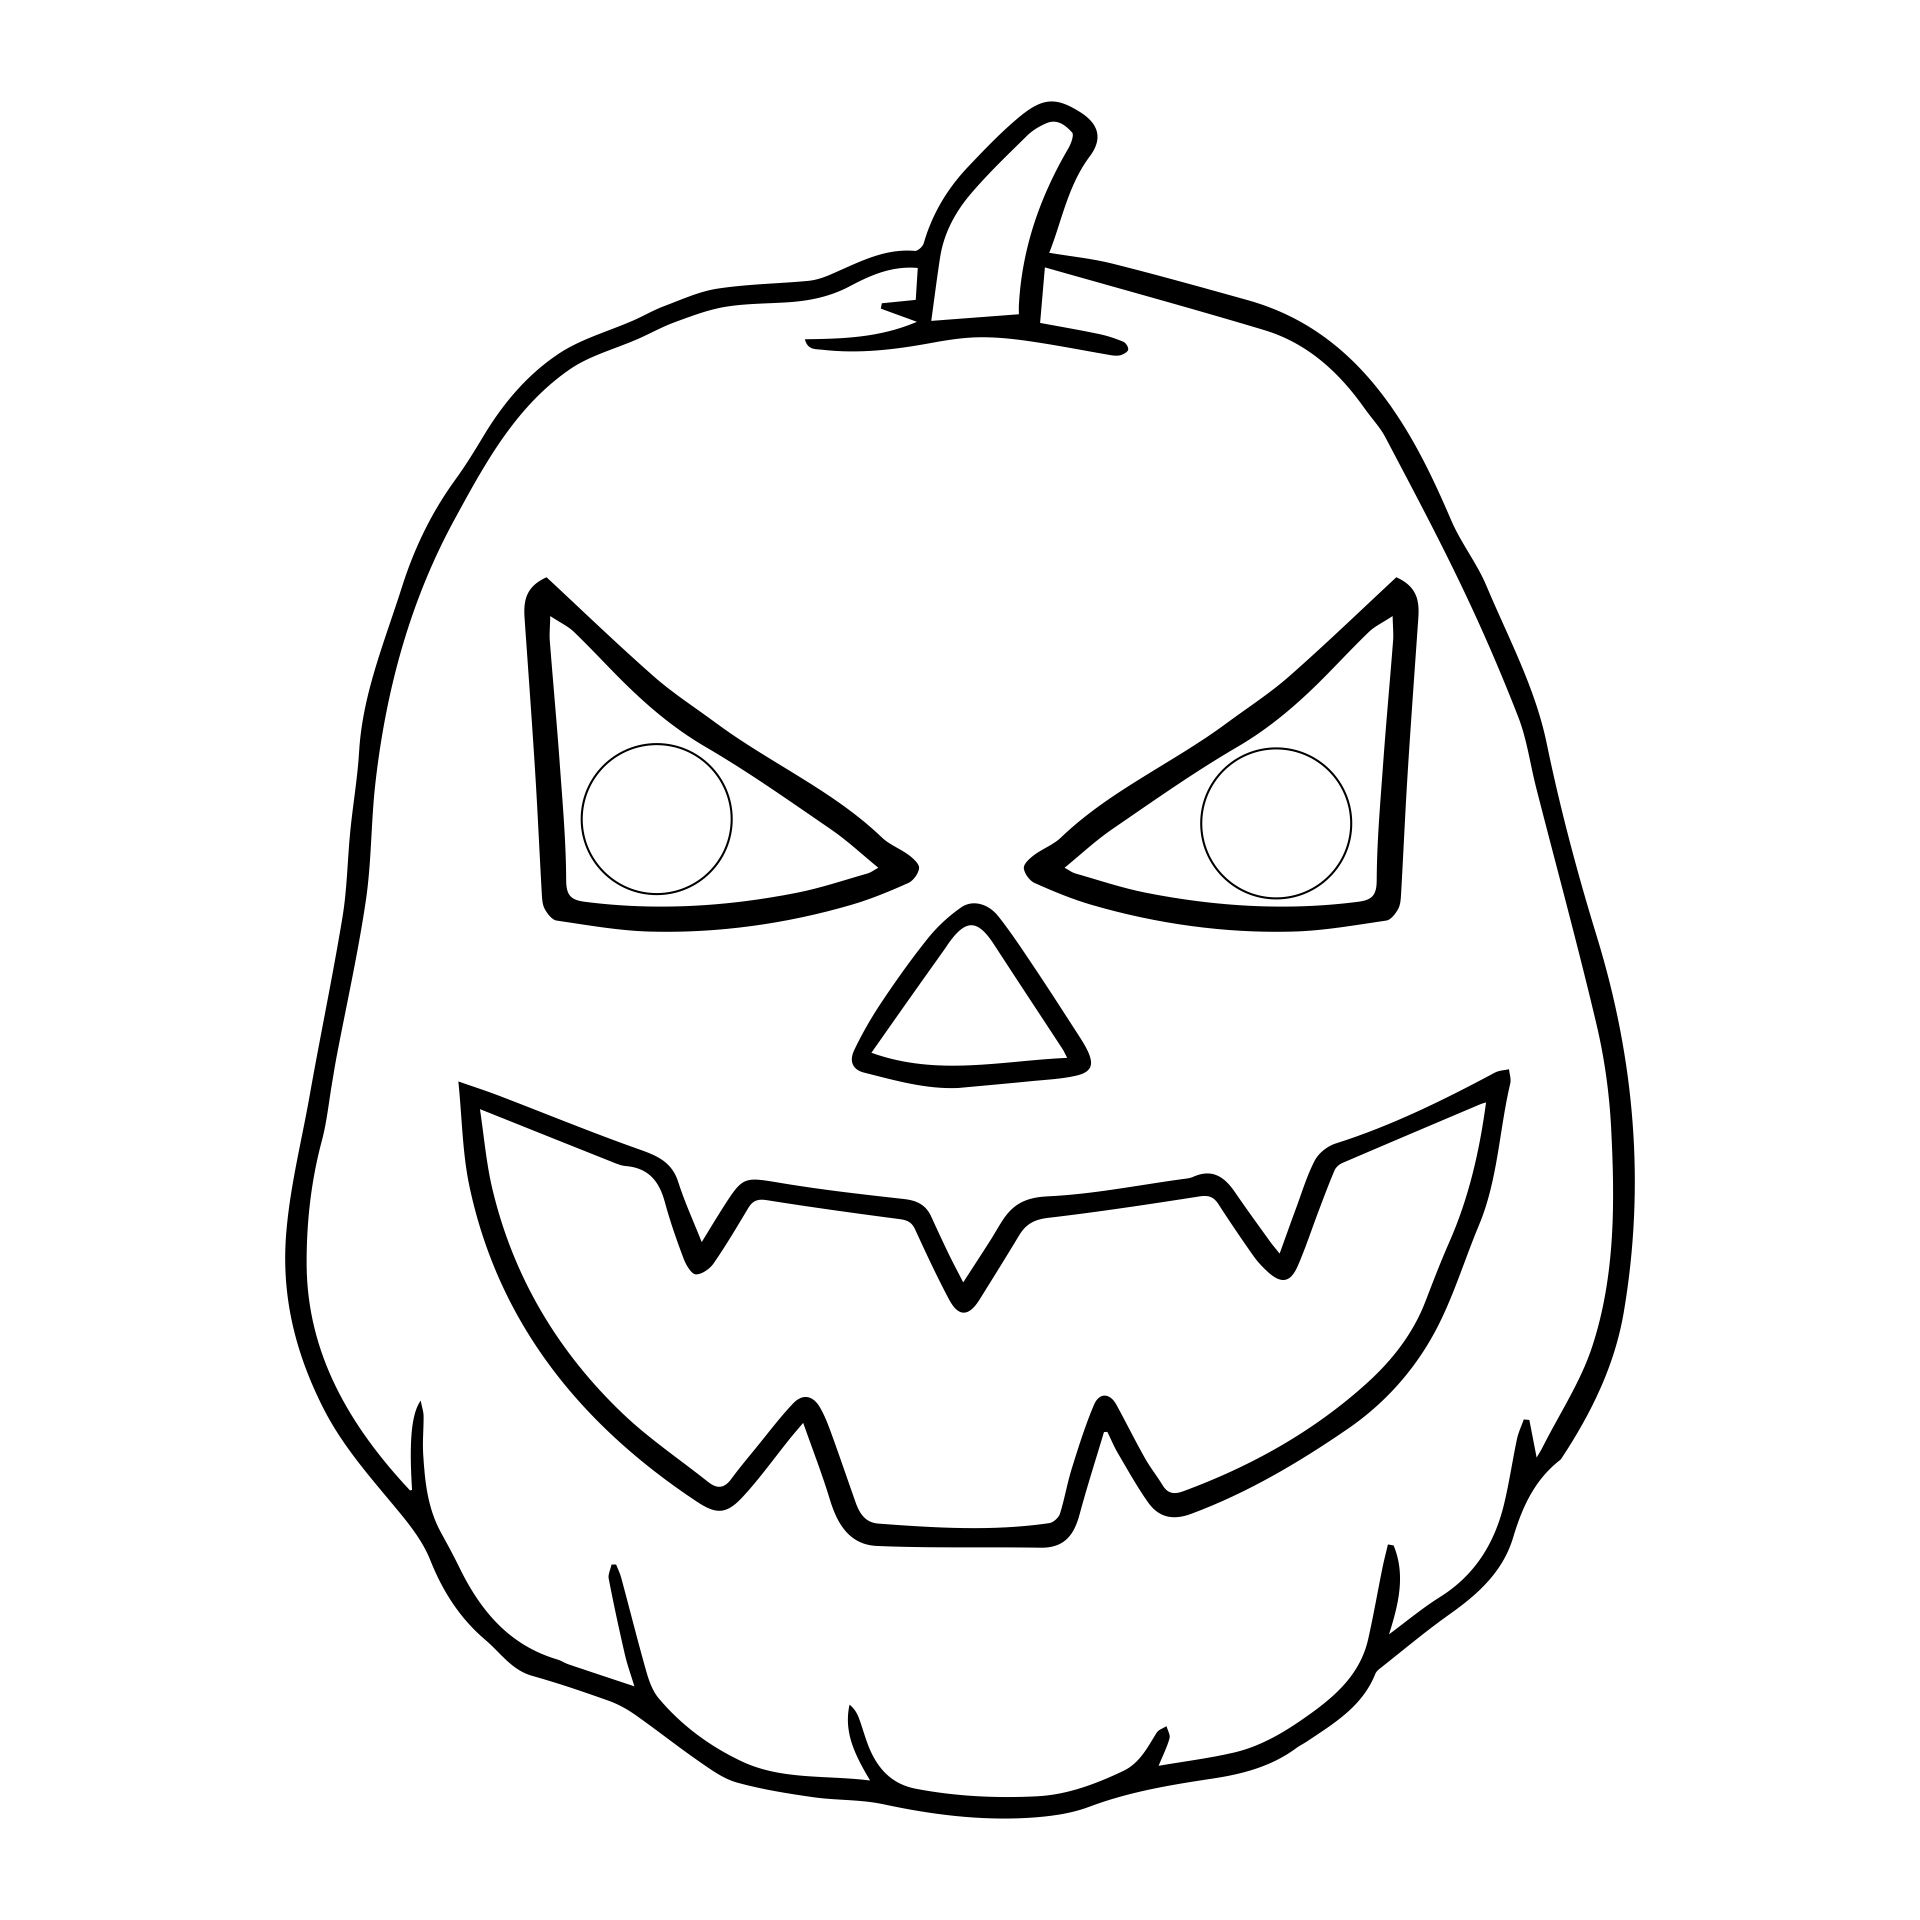 15-best-halloween-mask-printable-coloring-pages-pdf-for-free-at-printablee